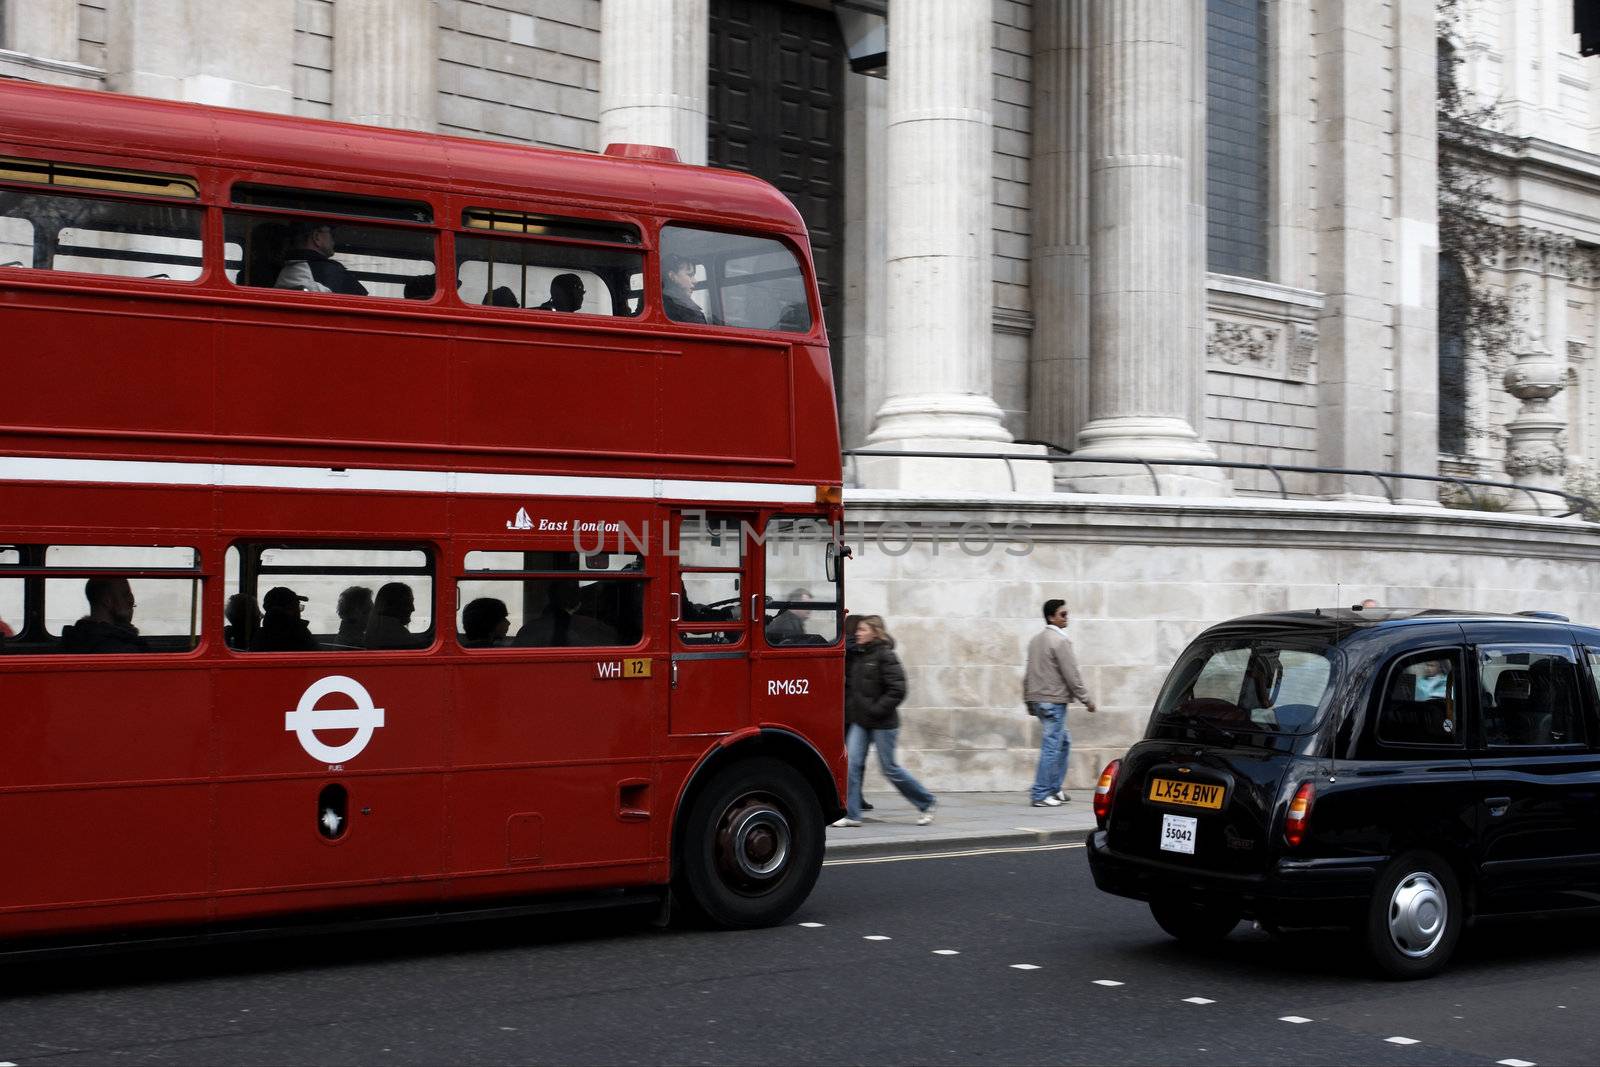 A London taxi driving past a bus